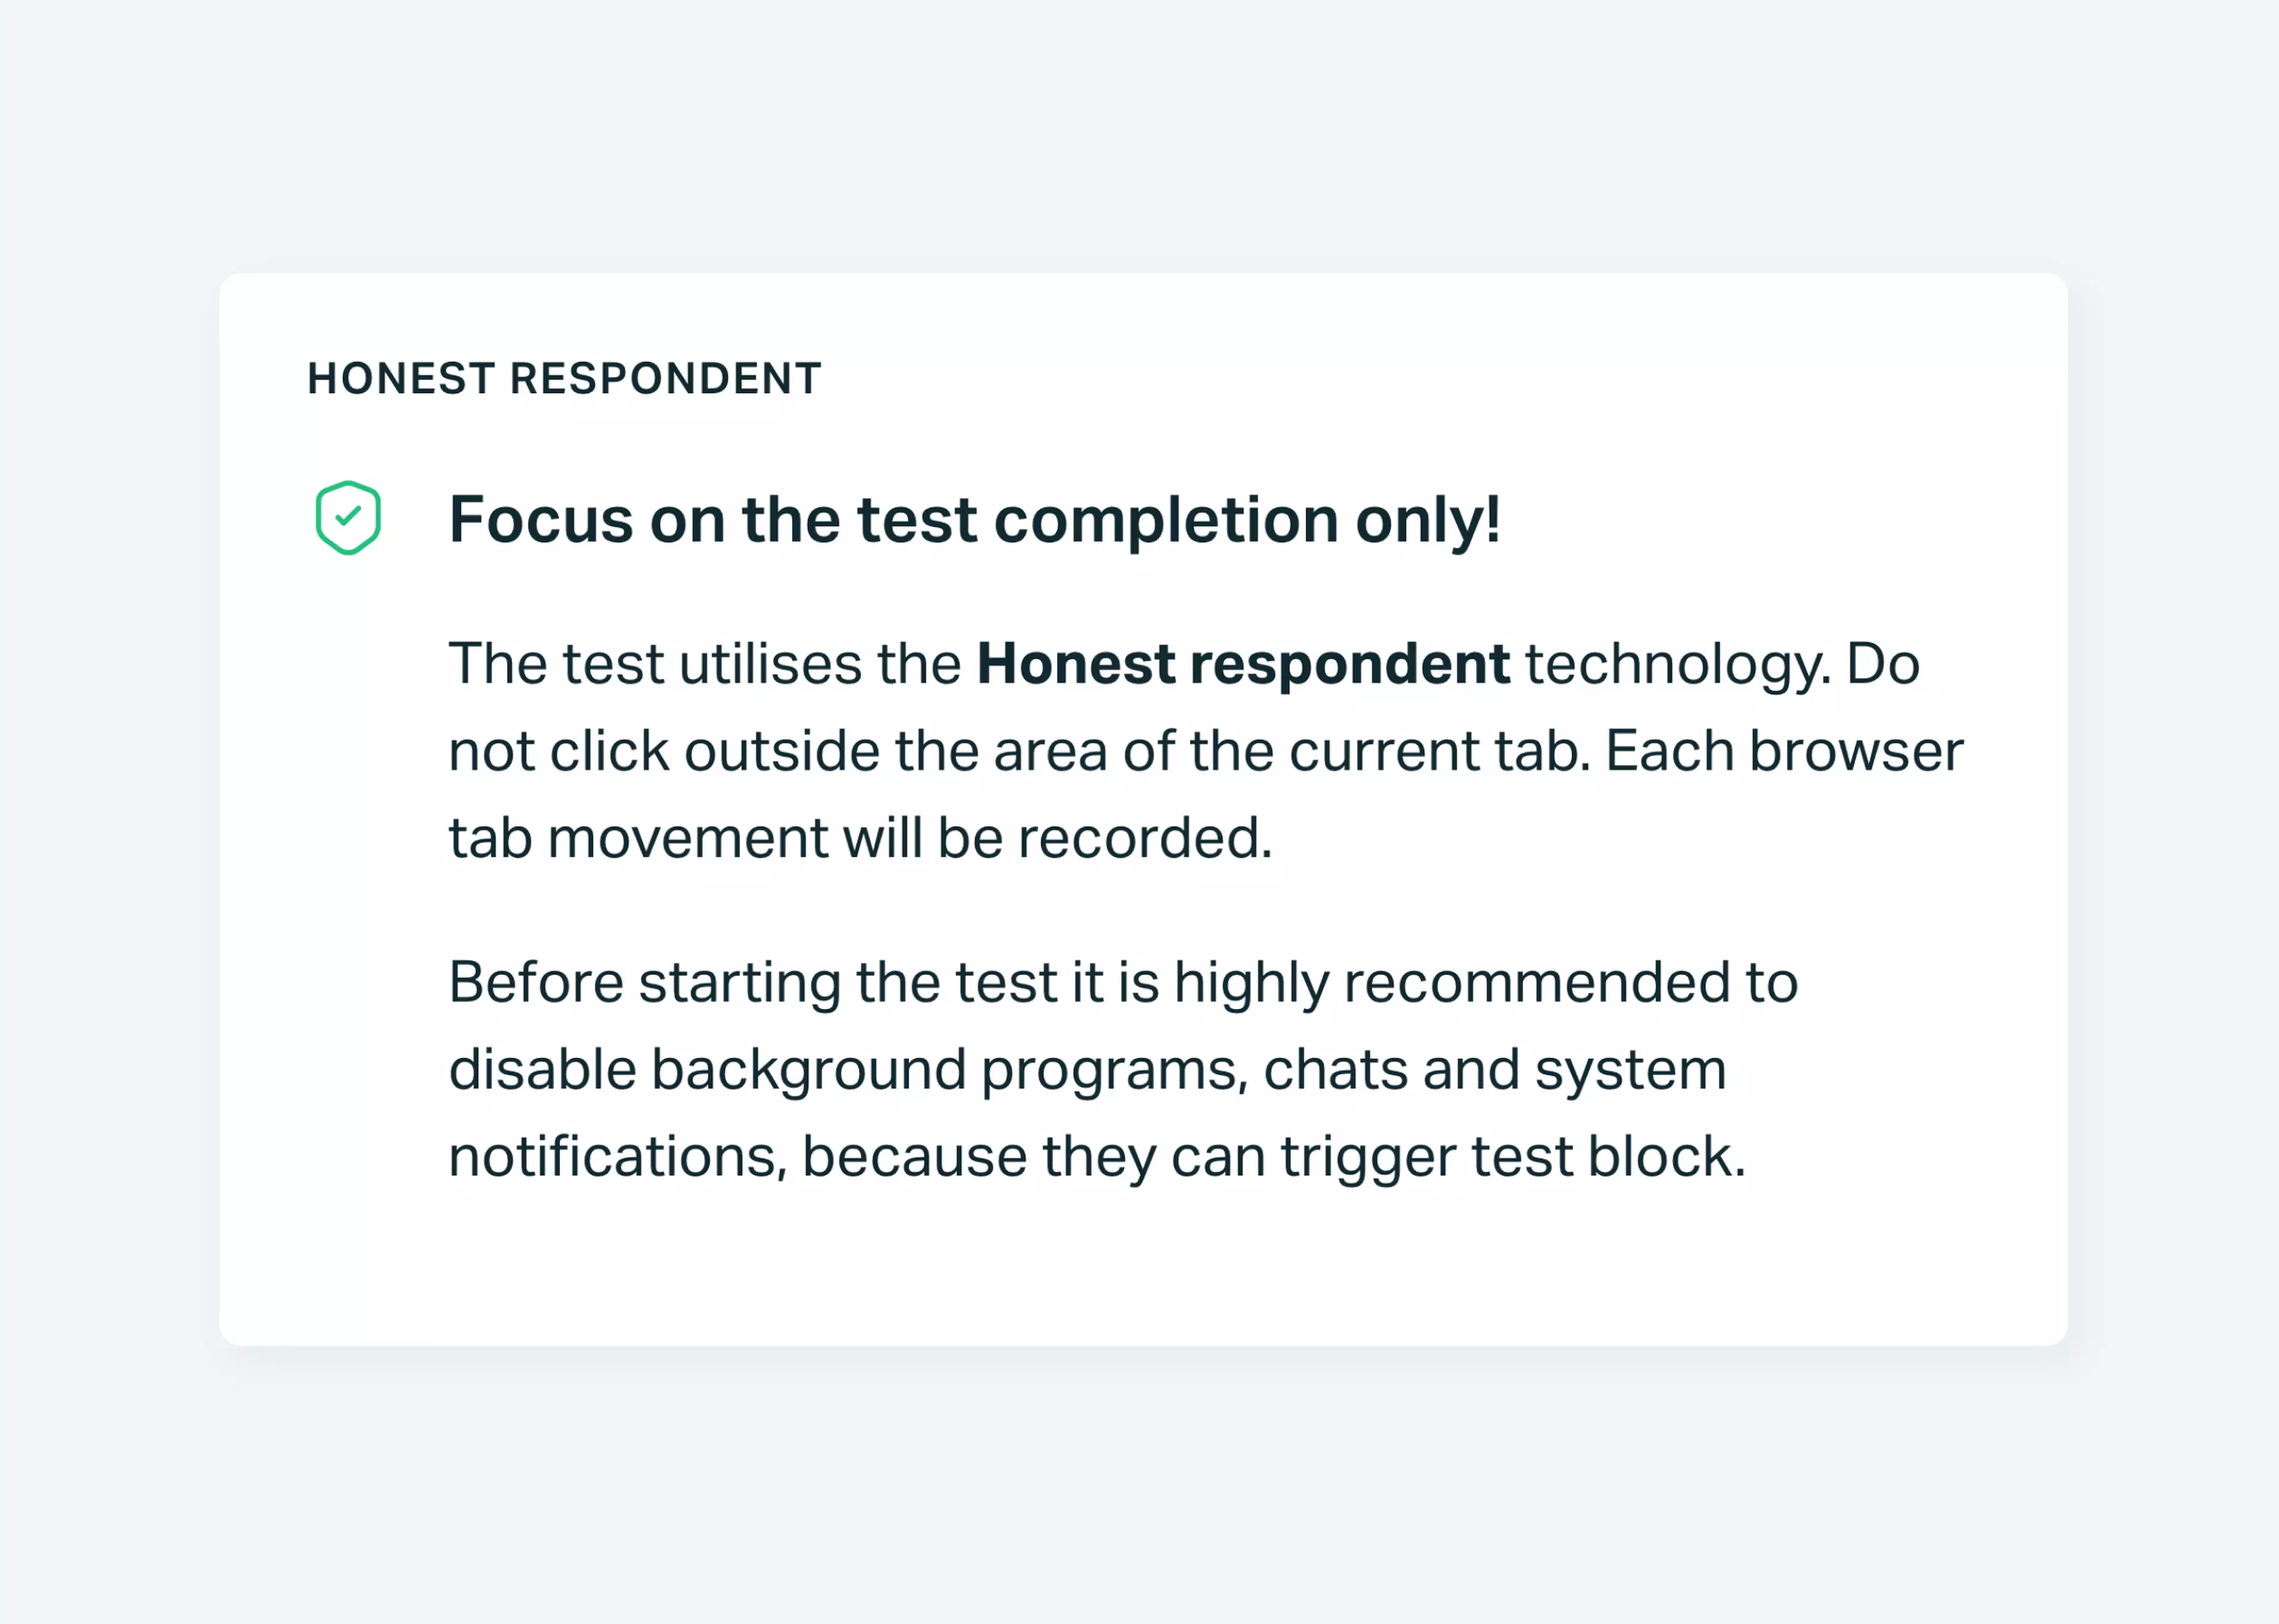   Testportal's Honest Respondent Technology prompt about a possible cheating attempt.